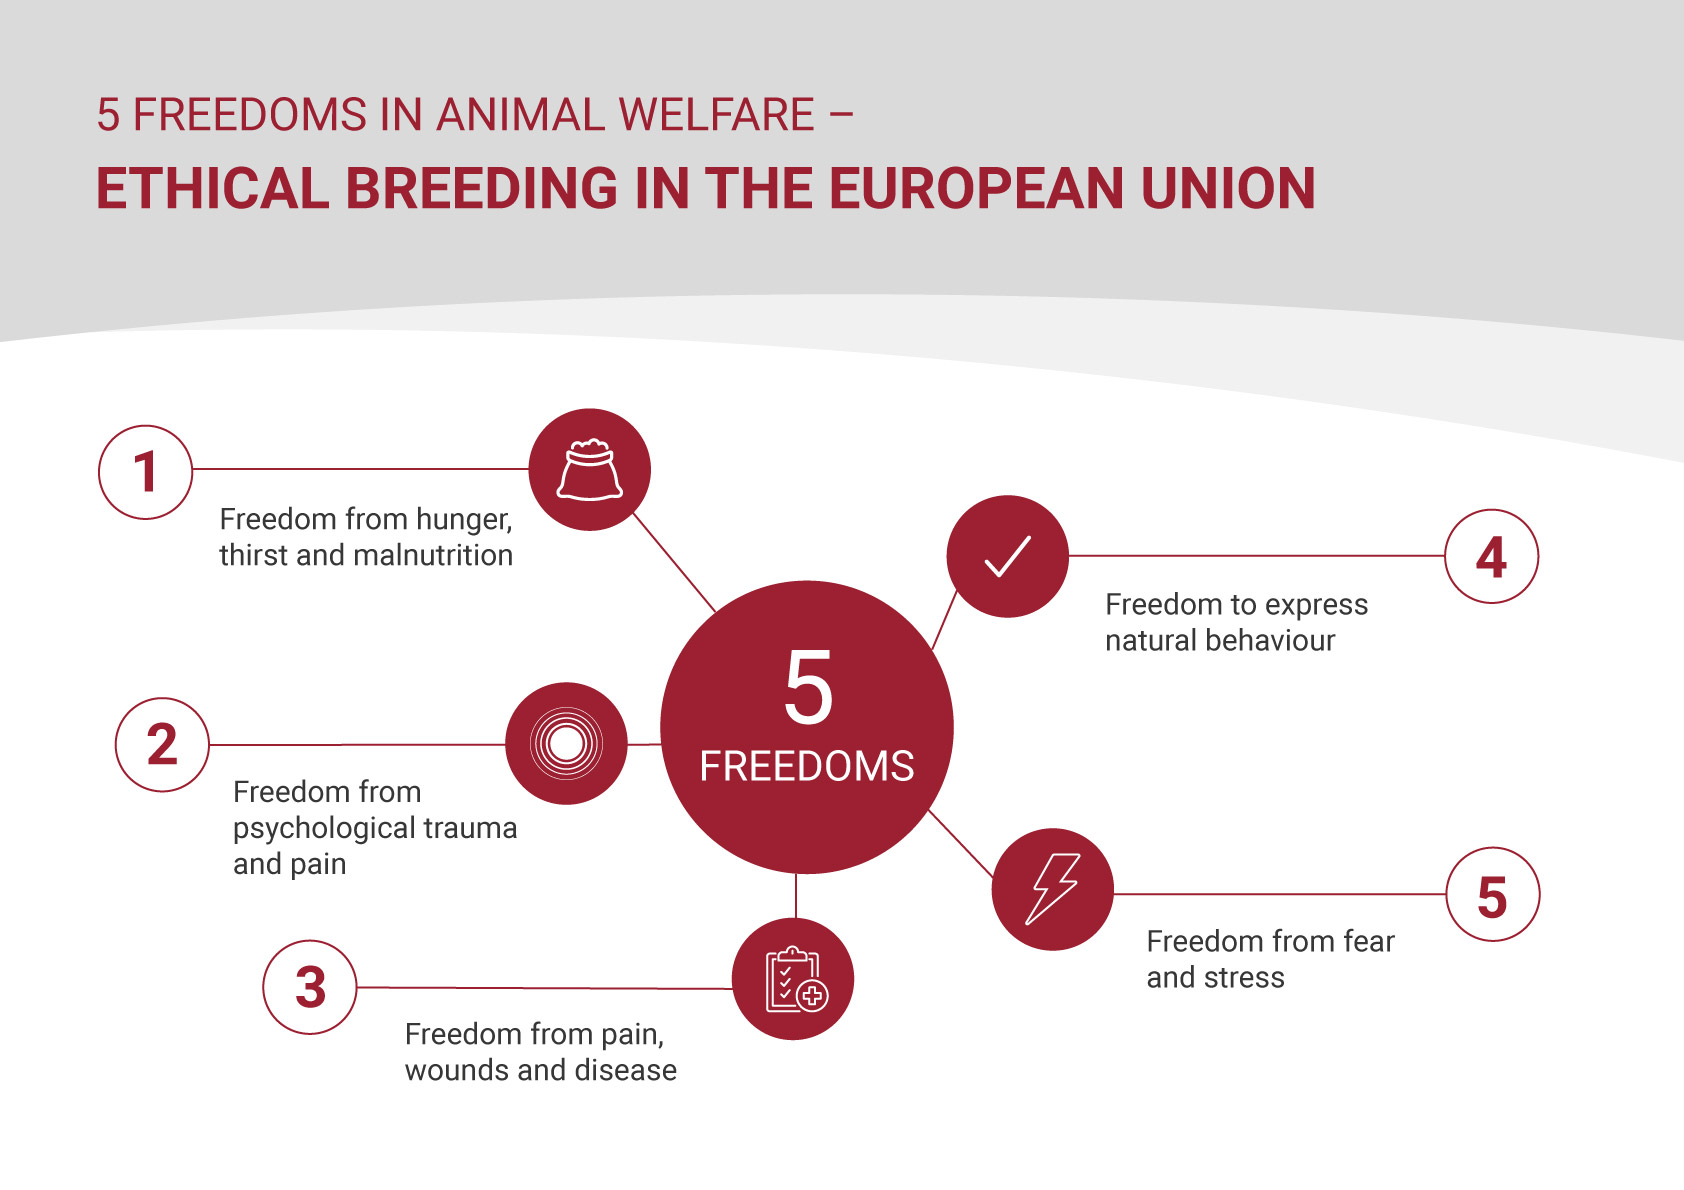 5 freedoms in animal welfare – ethical breeding in the European Union